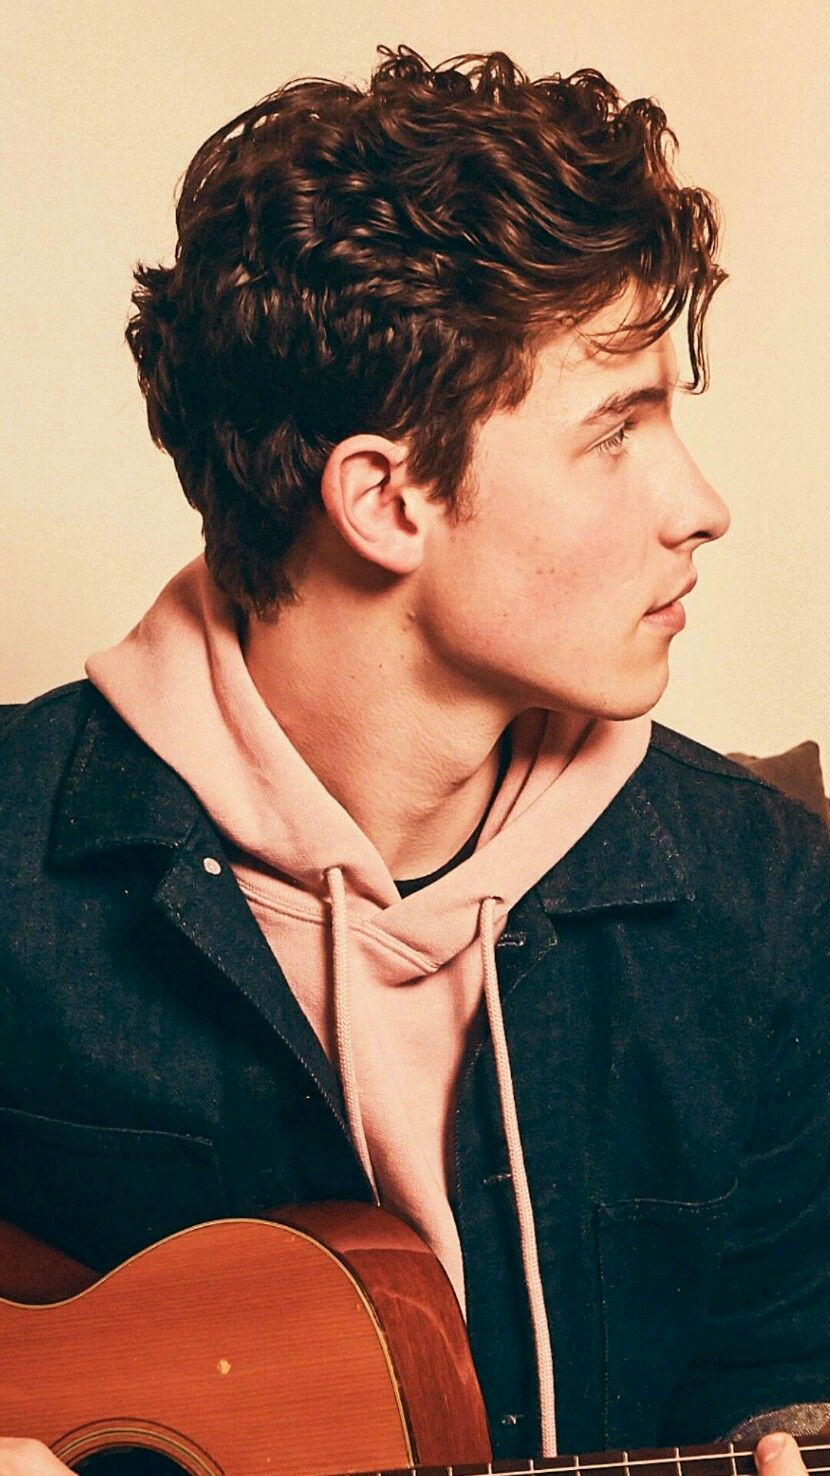 10 Shawn Mendes HD Wallpapers and Backgrounds